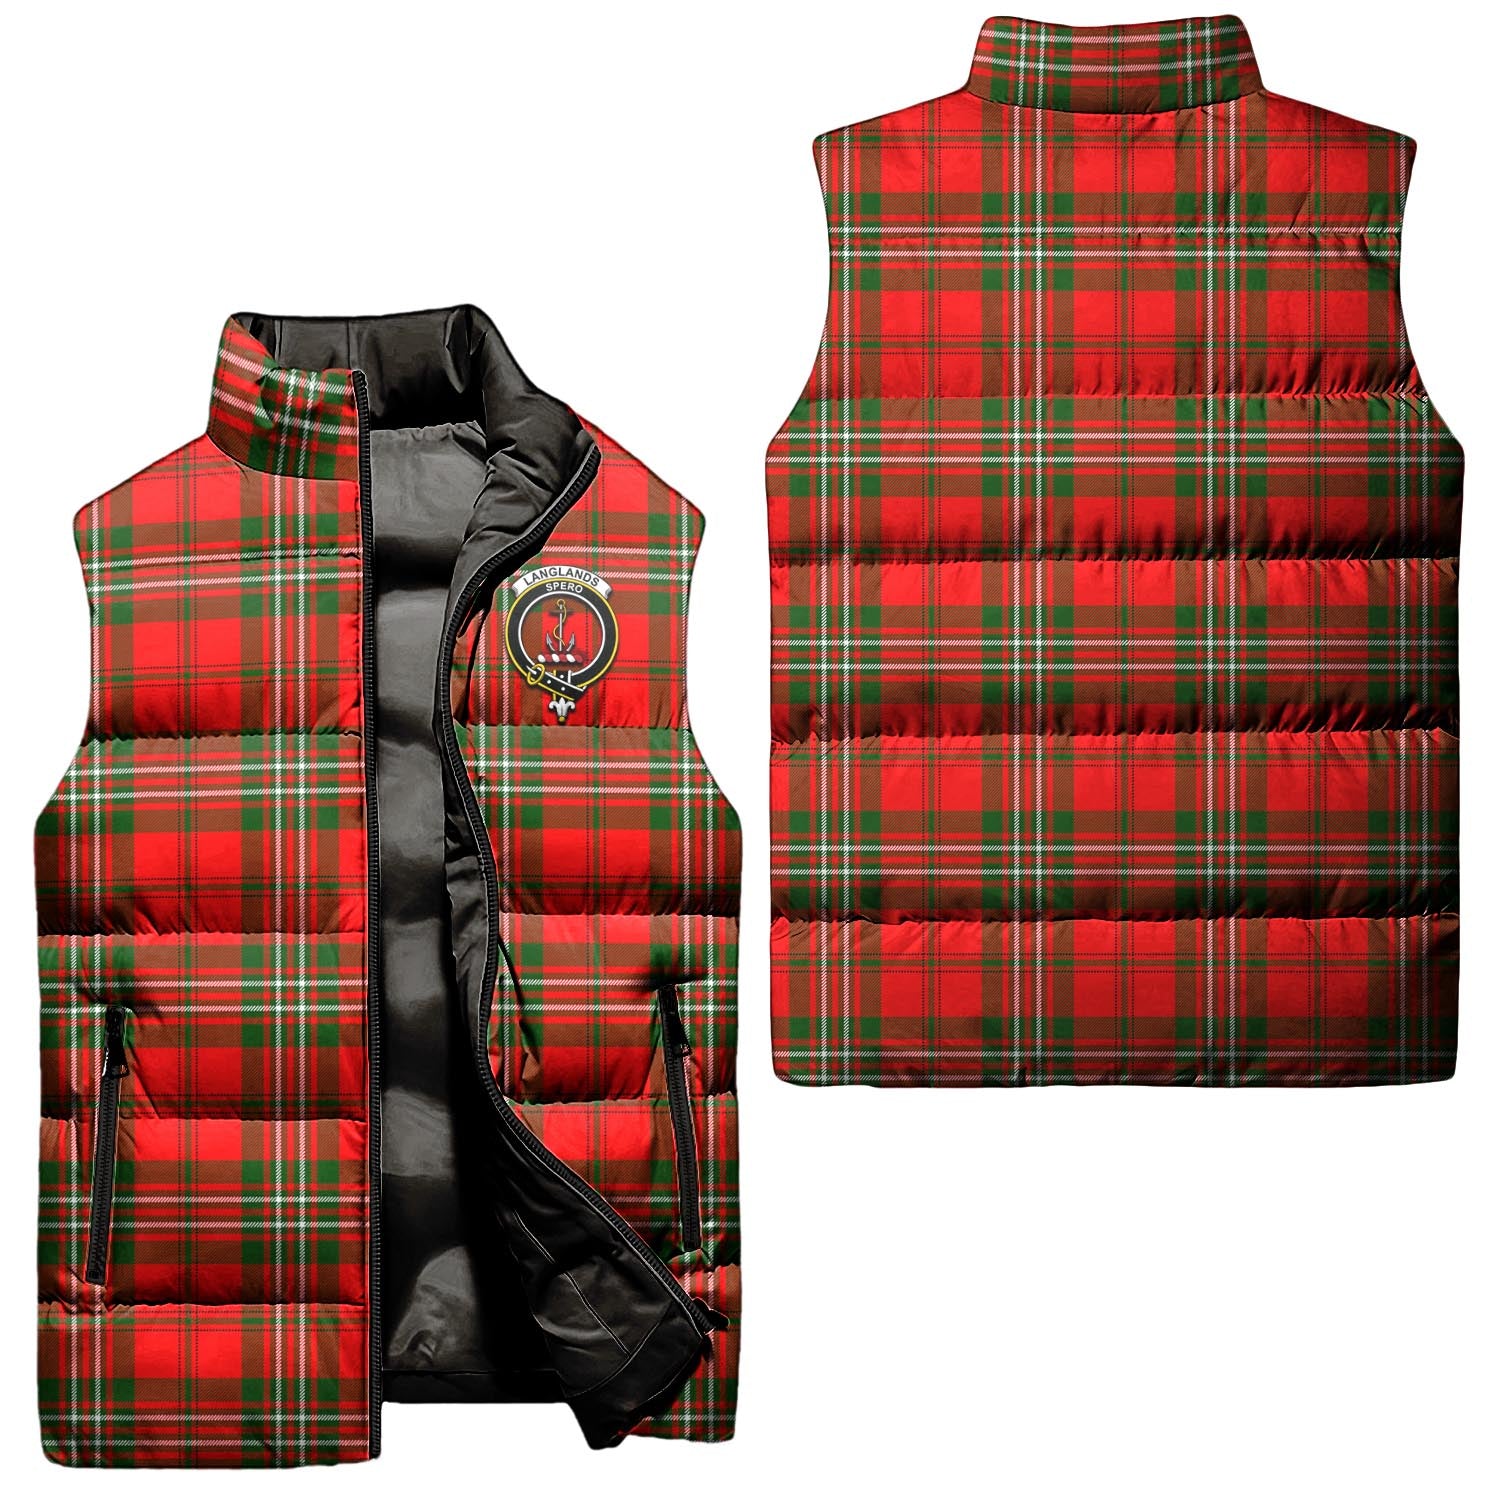 langlands-clan-puffer-vest-family-crest-plaid-sleeveless-down-jacket